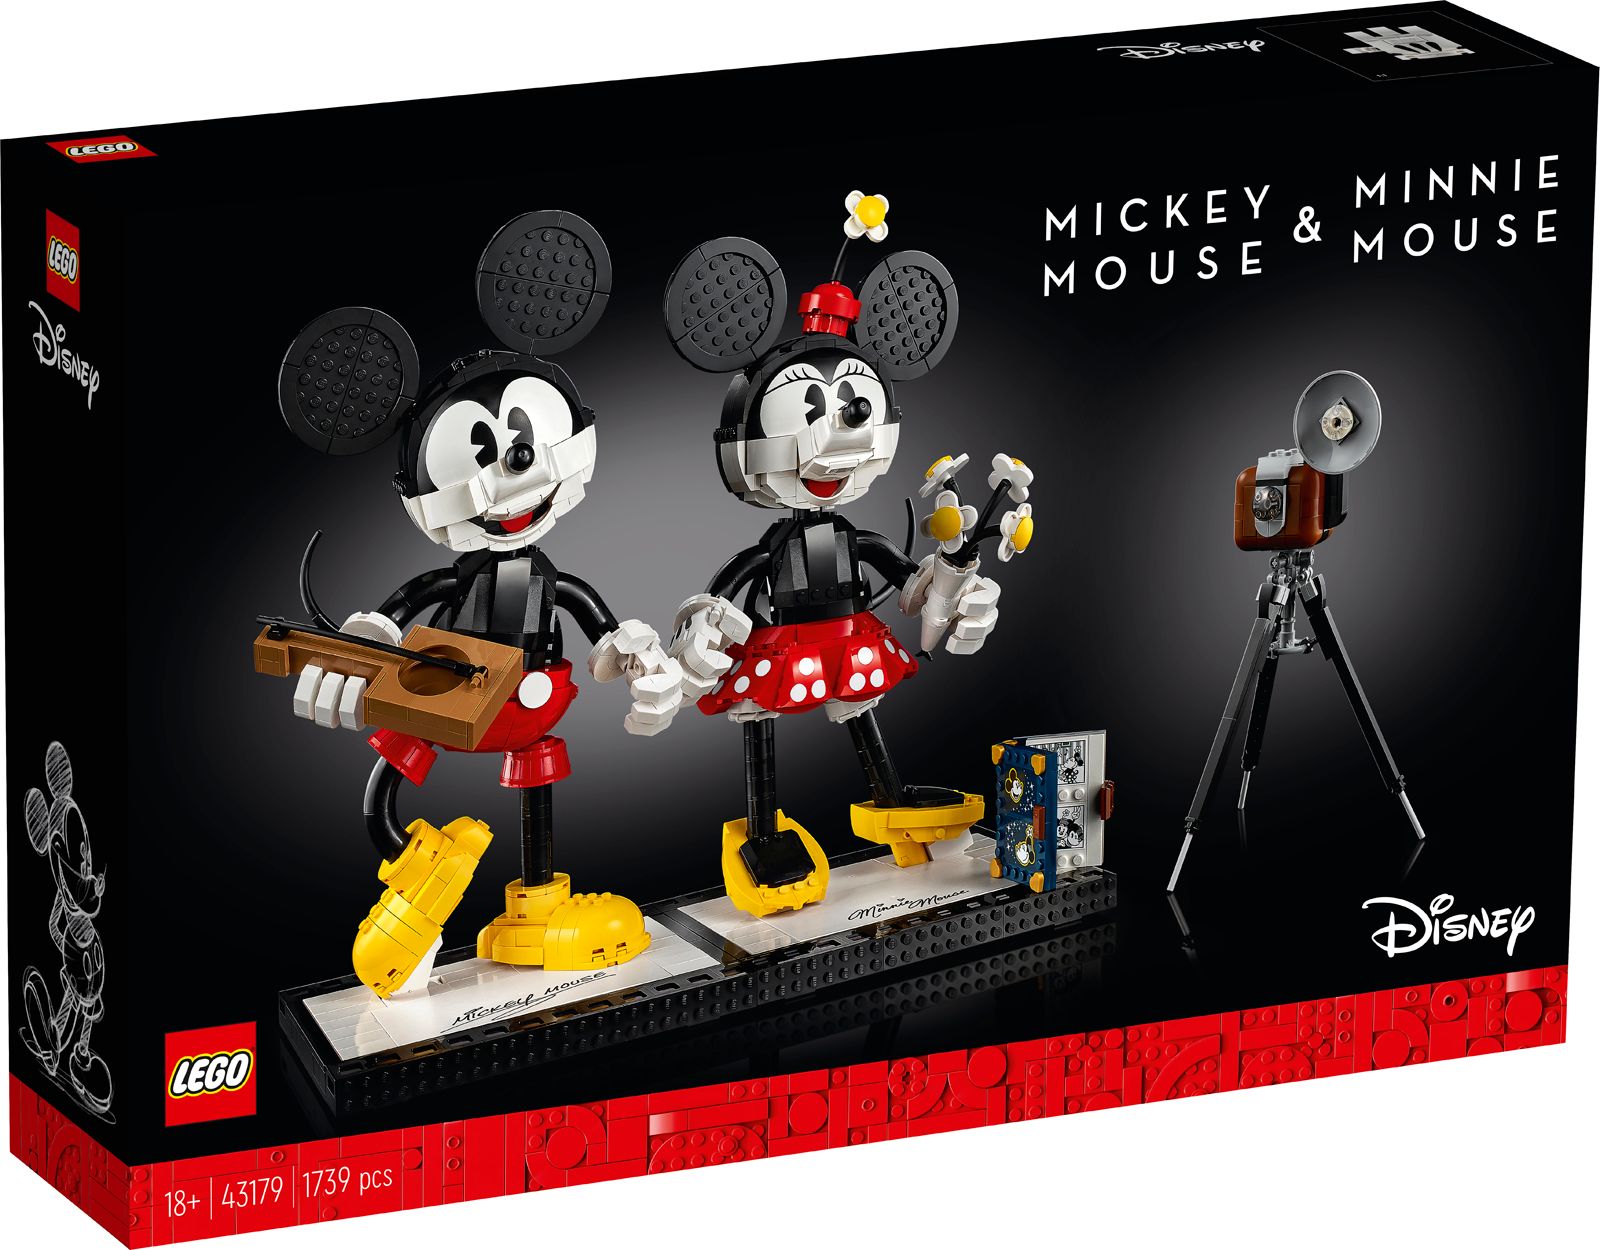 Legos buildable Mickey and Minnie Mouse are simply super image 1